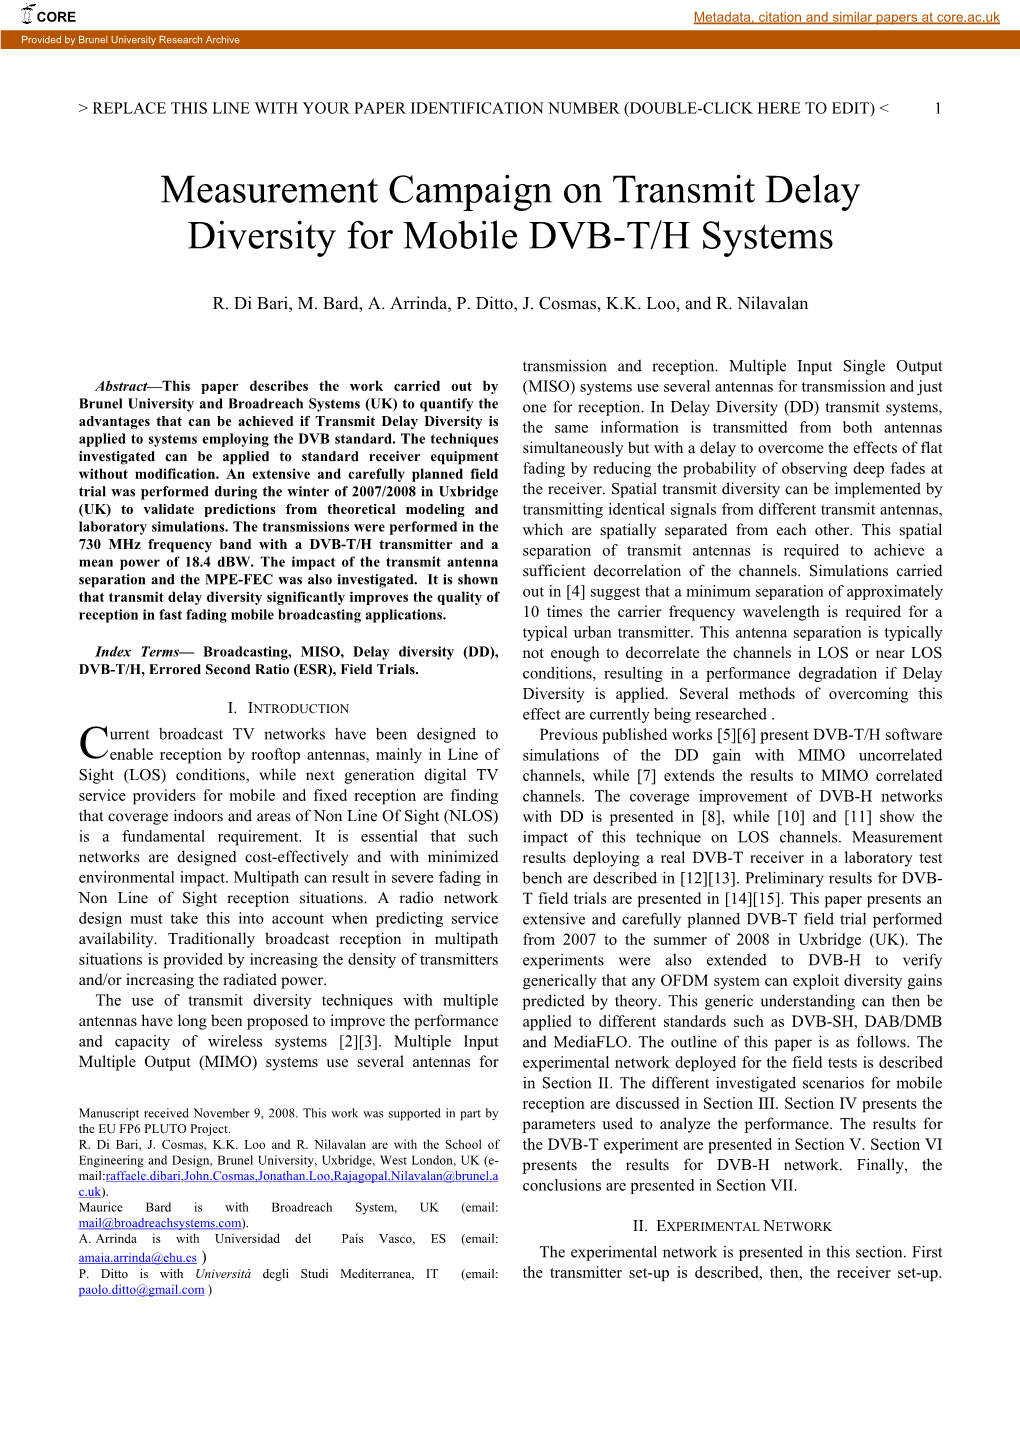 Measurement Campaign on Transmit Delay Diversity for Mobile DVB-T/H Systems